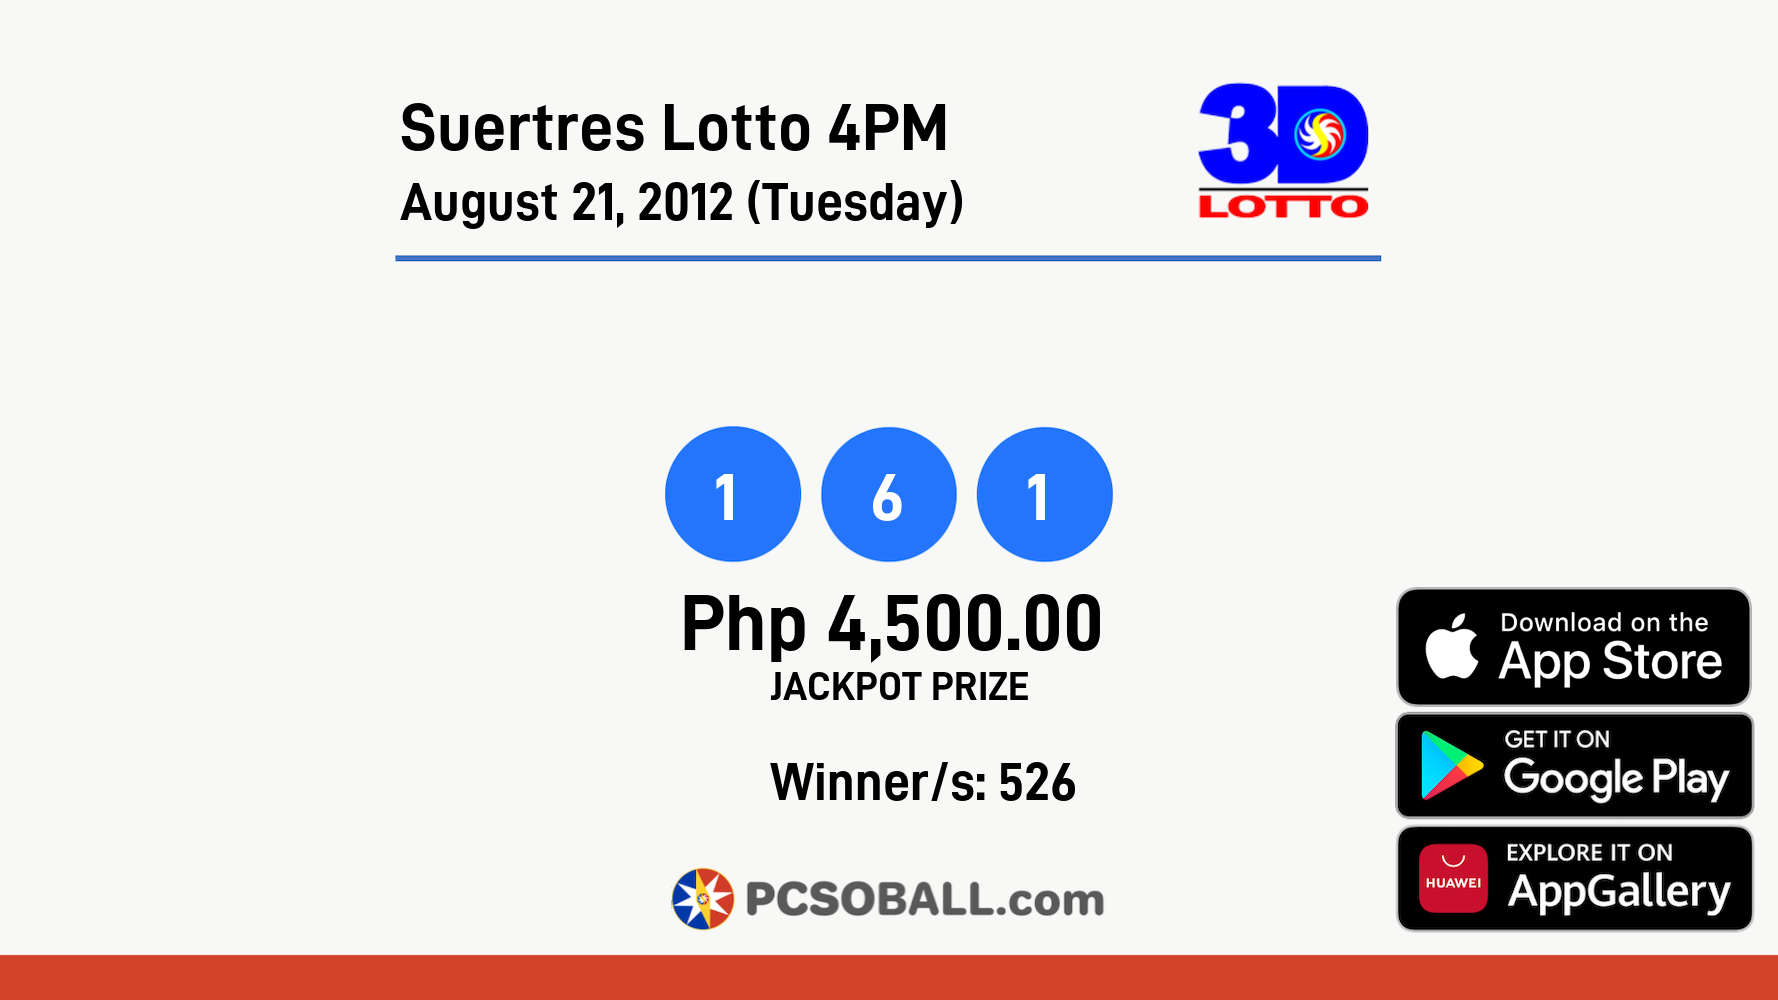 Suertres Lotto 4PM August 21, 2012 (Tuesday) Result